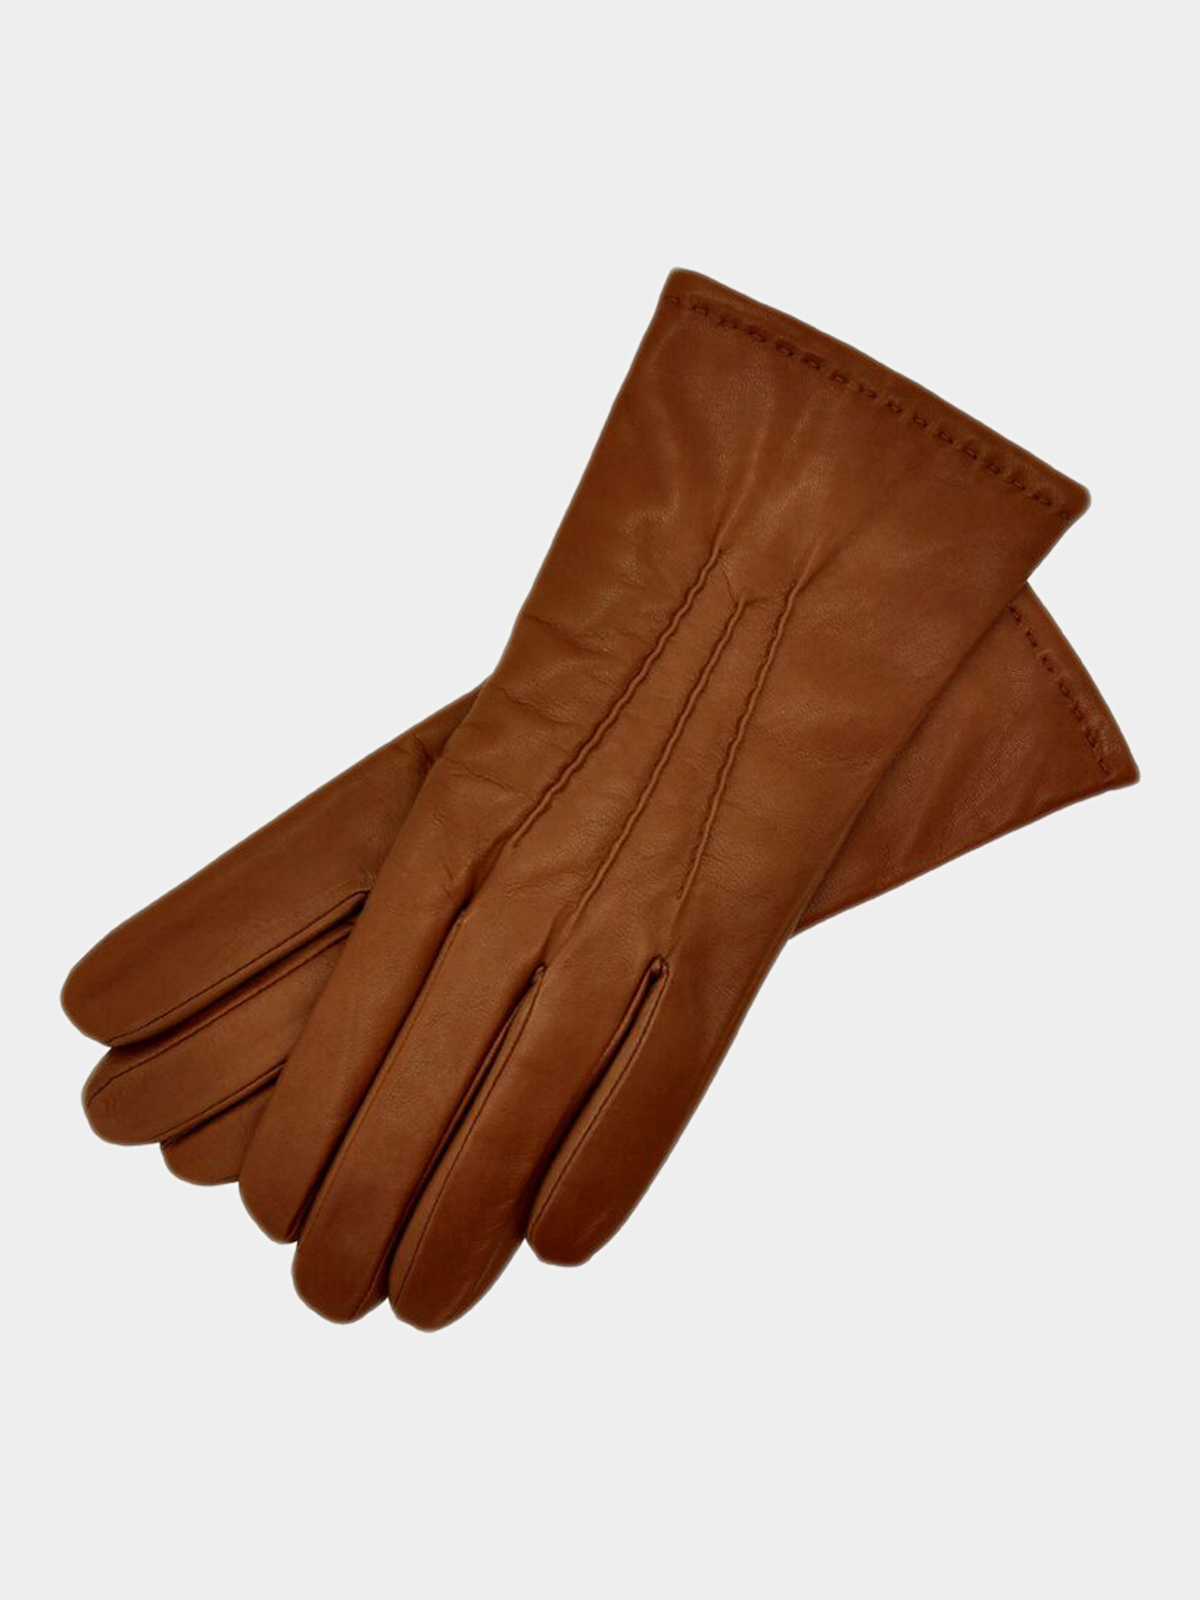 Russet Leather Gloves Womens Size 7.5